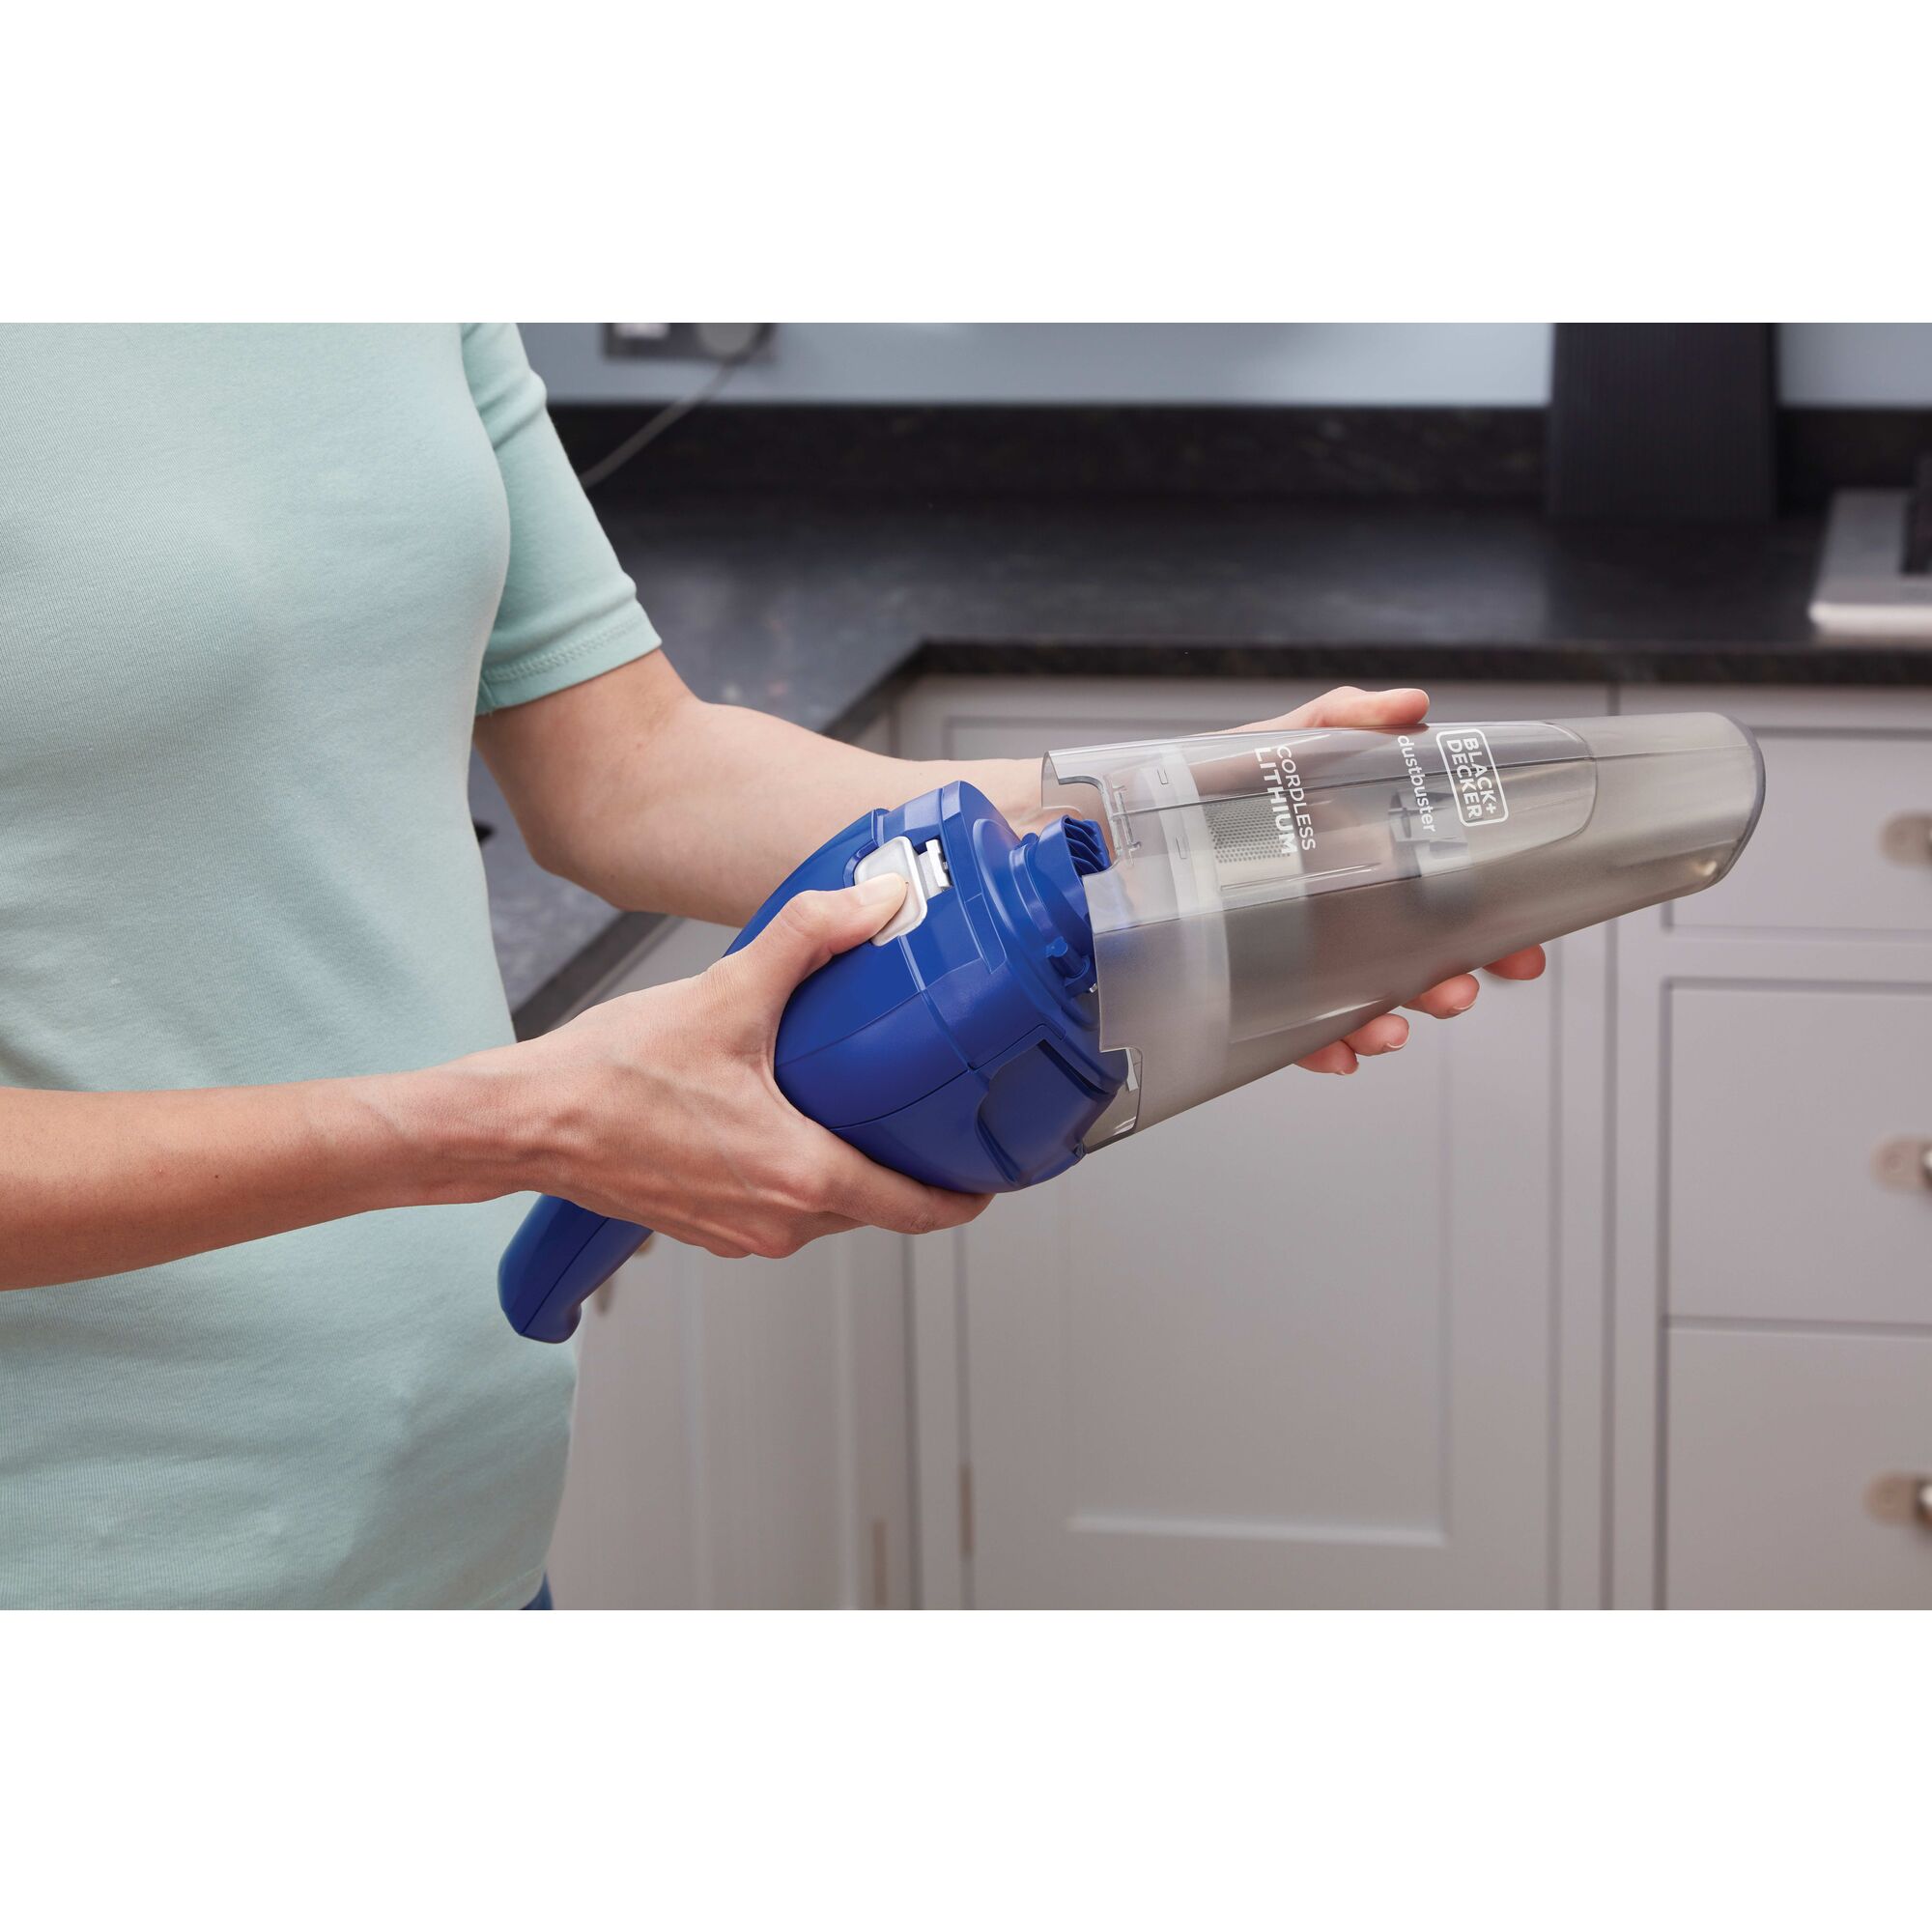 Translucent bagless dirt bowl feature of Dust buster Quick Clean Cordless Handheld Vacuum.